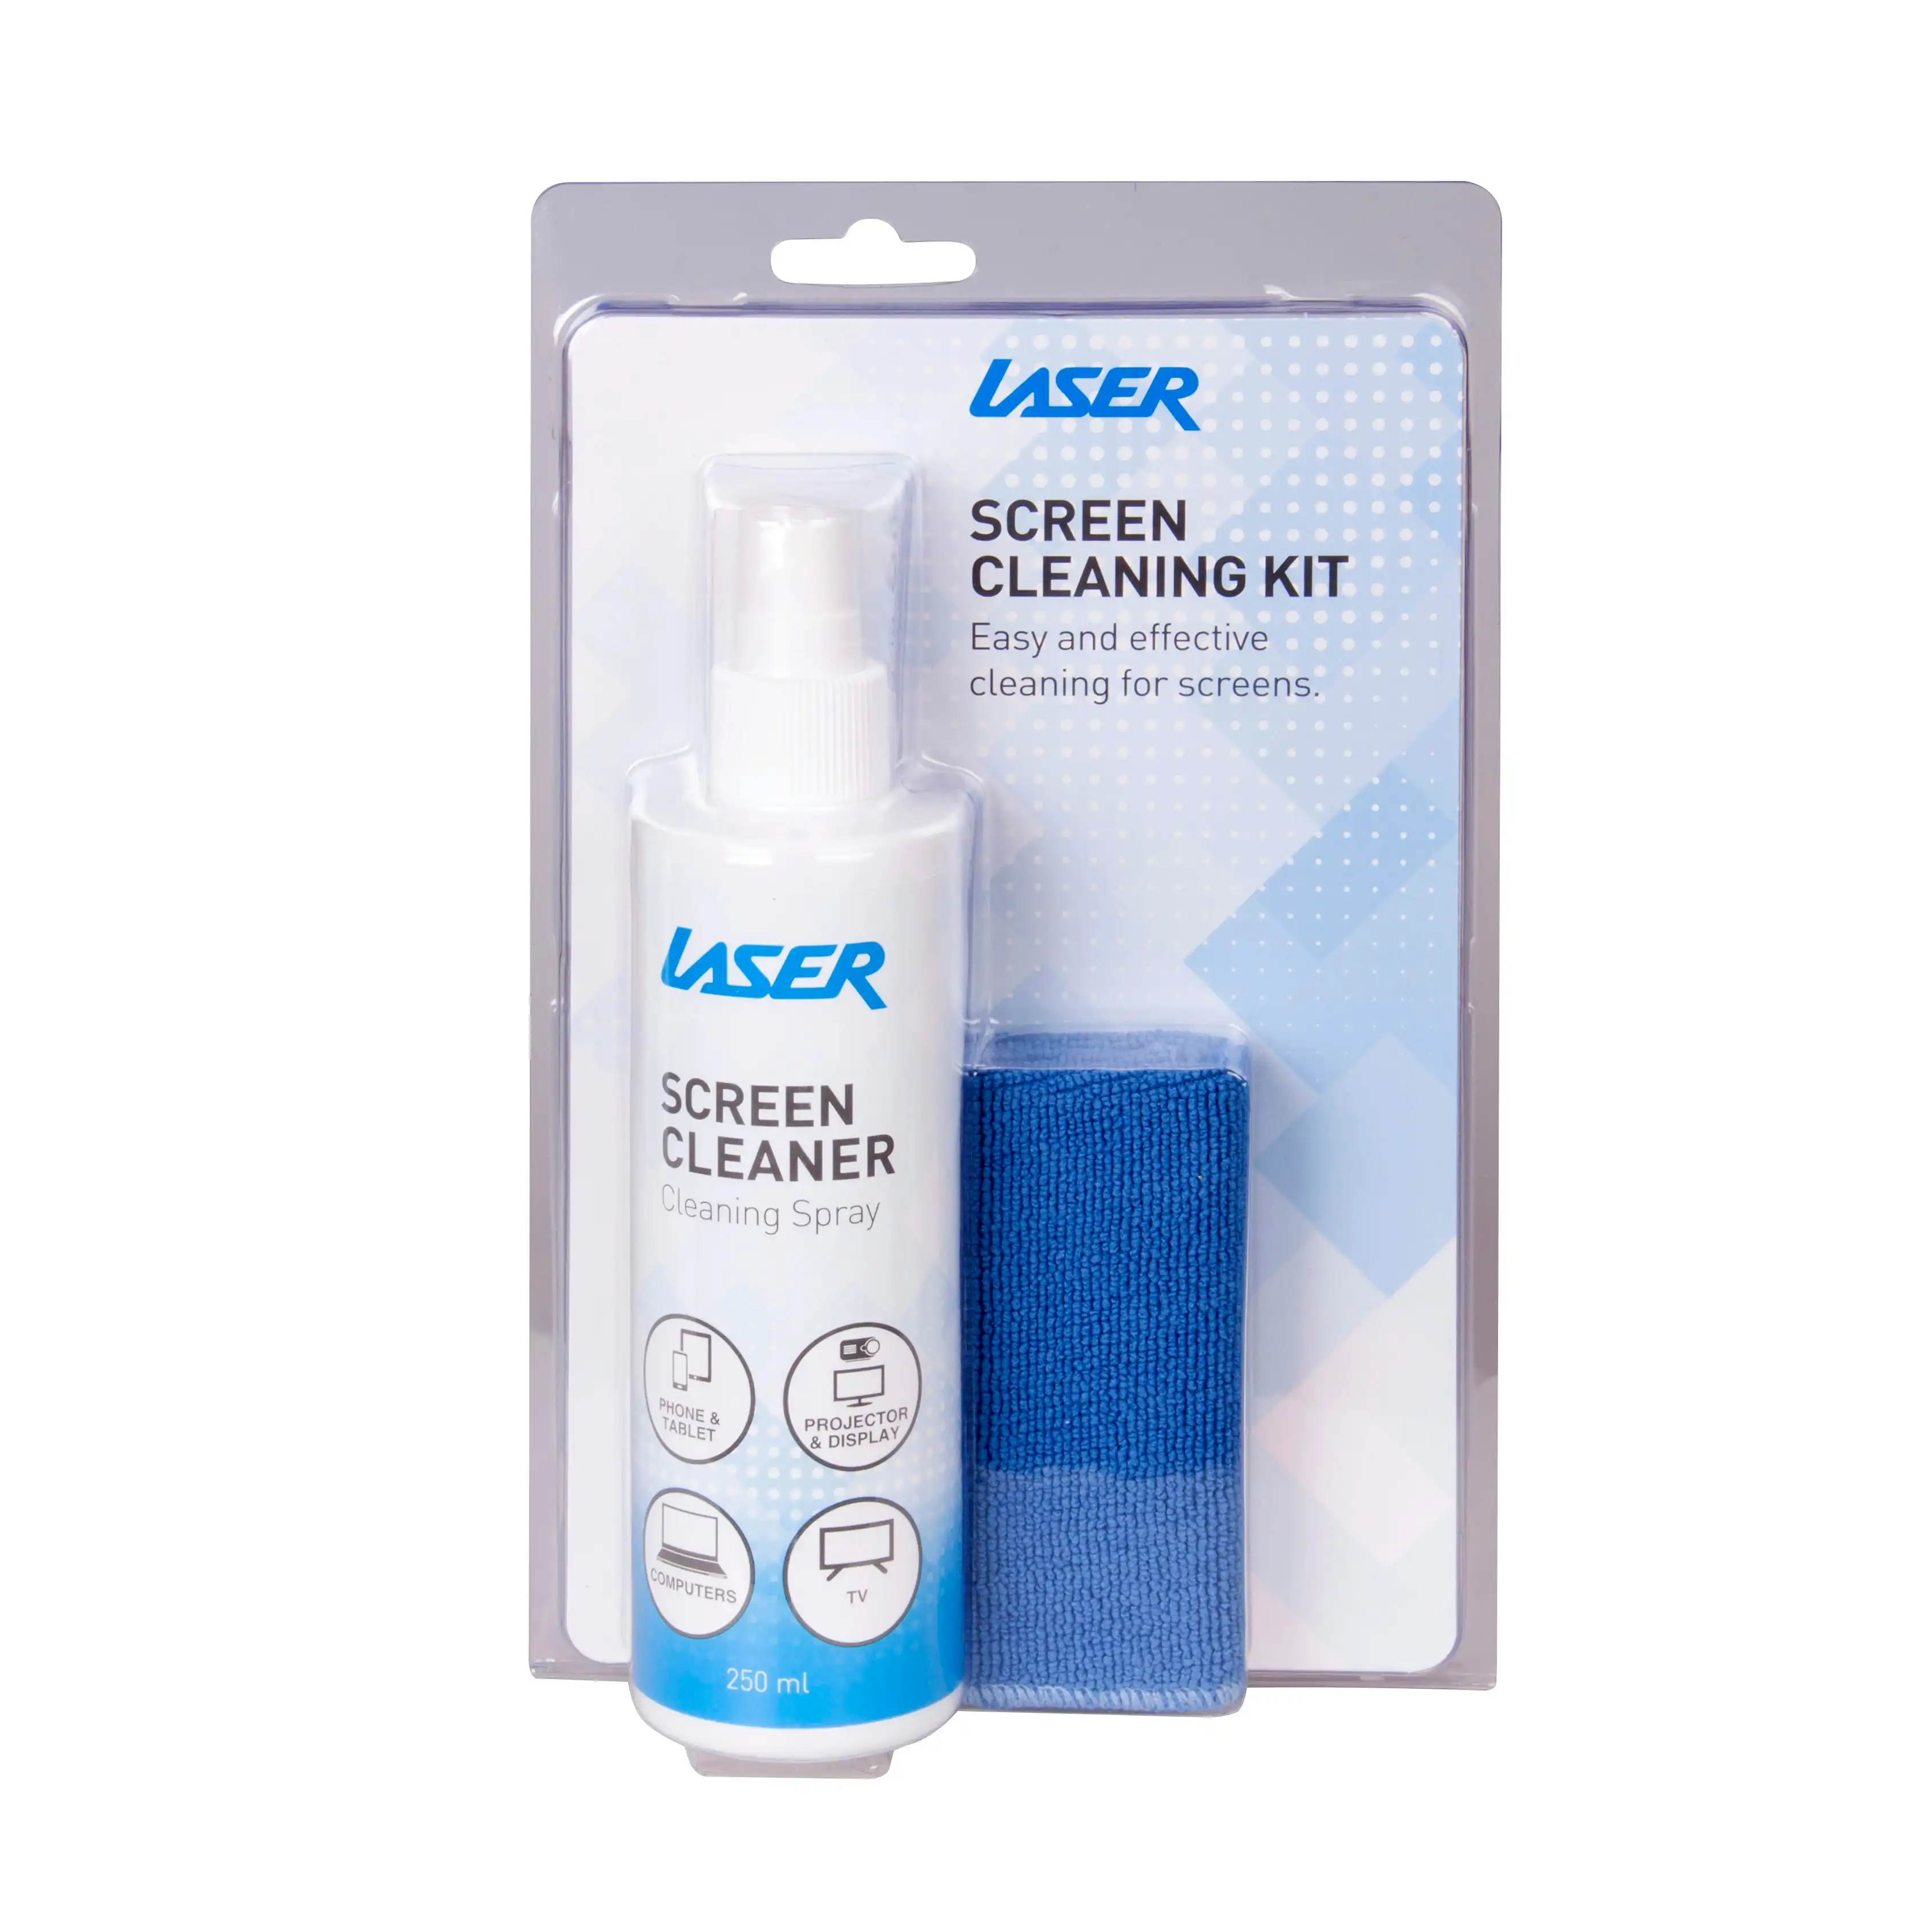 Laser Cleaning Kit for Monitor Laptop TV Tablet iPad